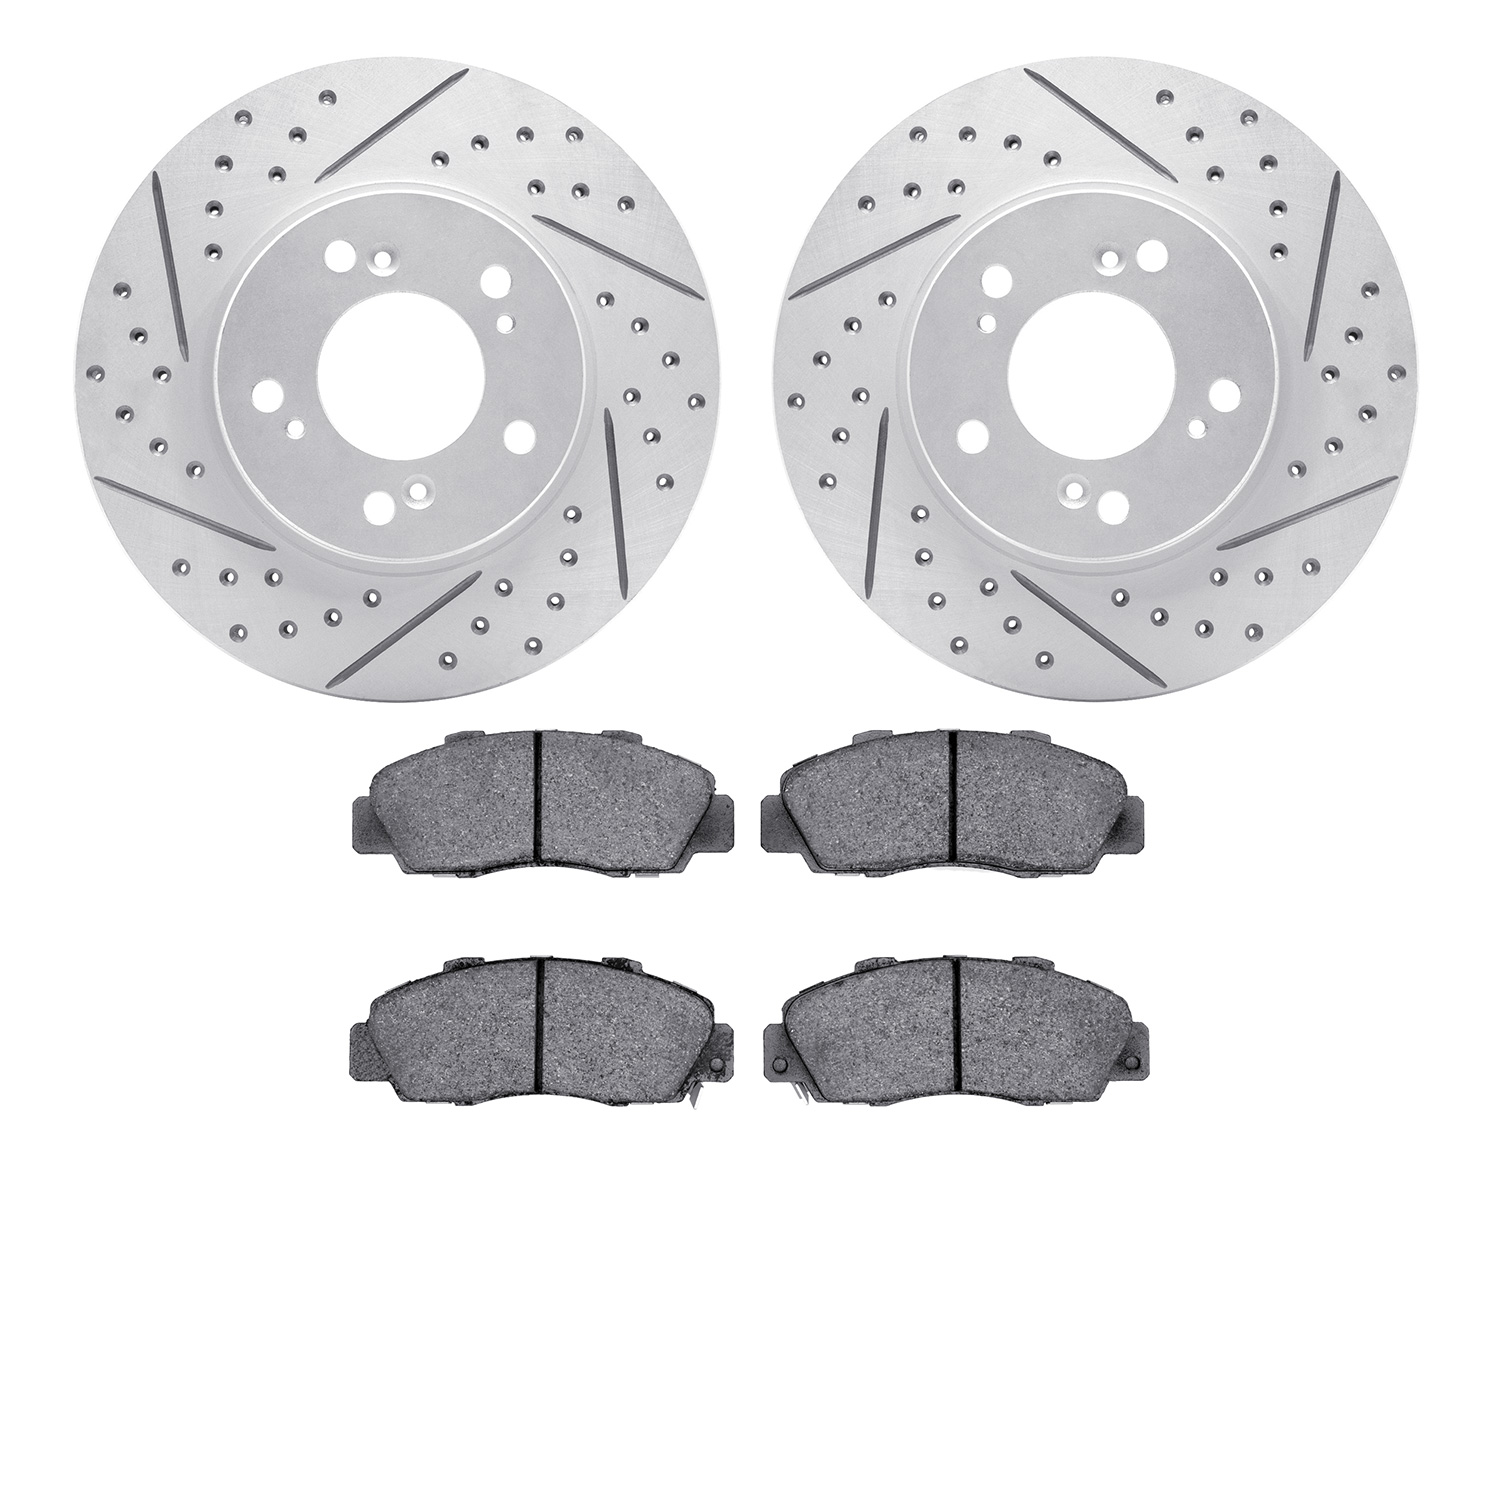 2502-59044 Geoperformance Drilled/Slotted Rotors w/5000 Advanced Brake Pads Kit, 1997-2001 Acura/Honda, Position: Front